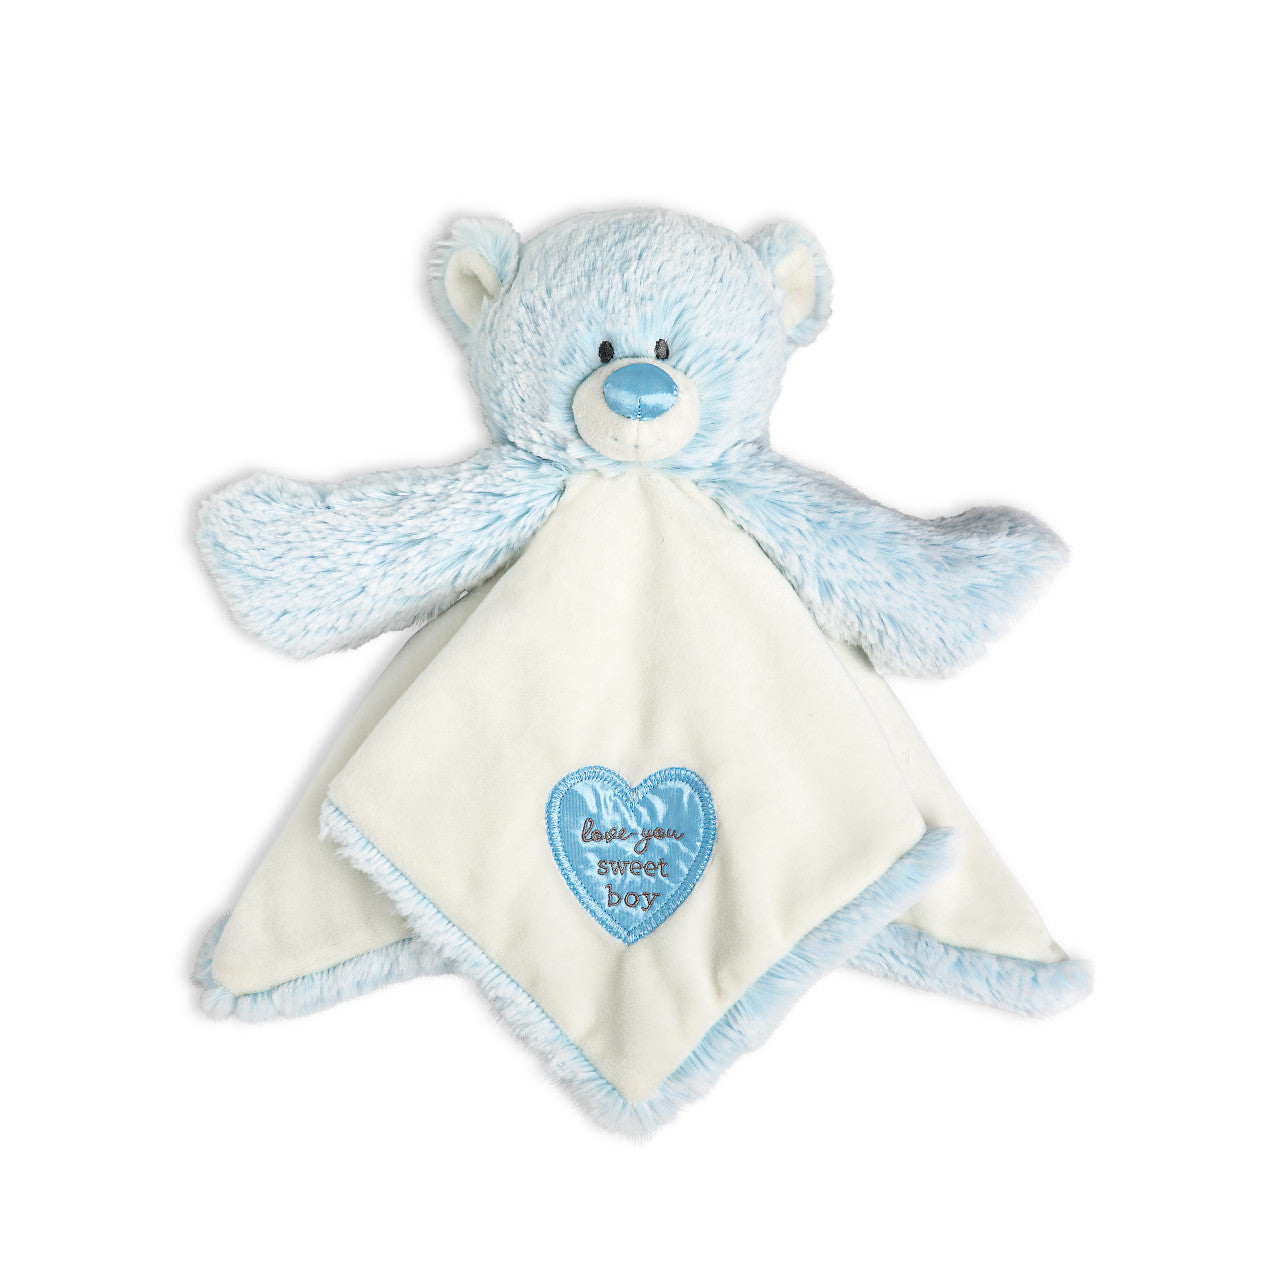 Demdaco Teddy Rattle Blankie - Blue available at The Good Life Boutique